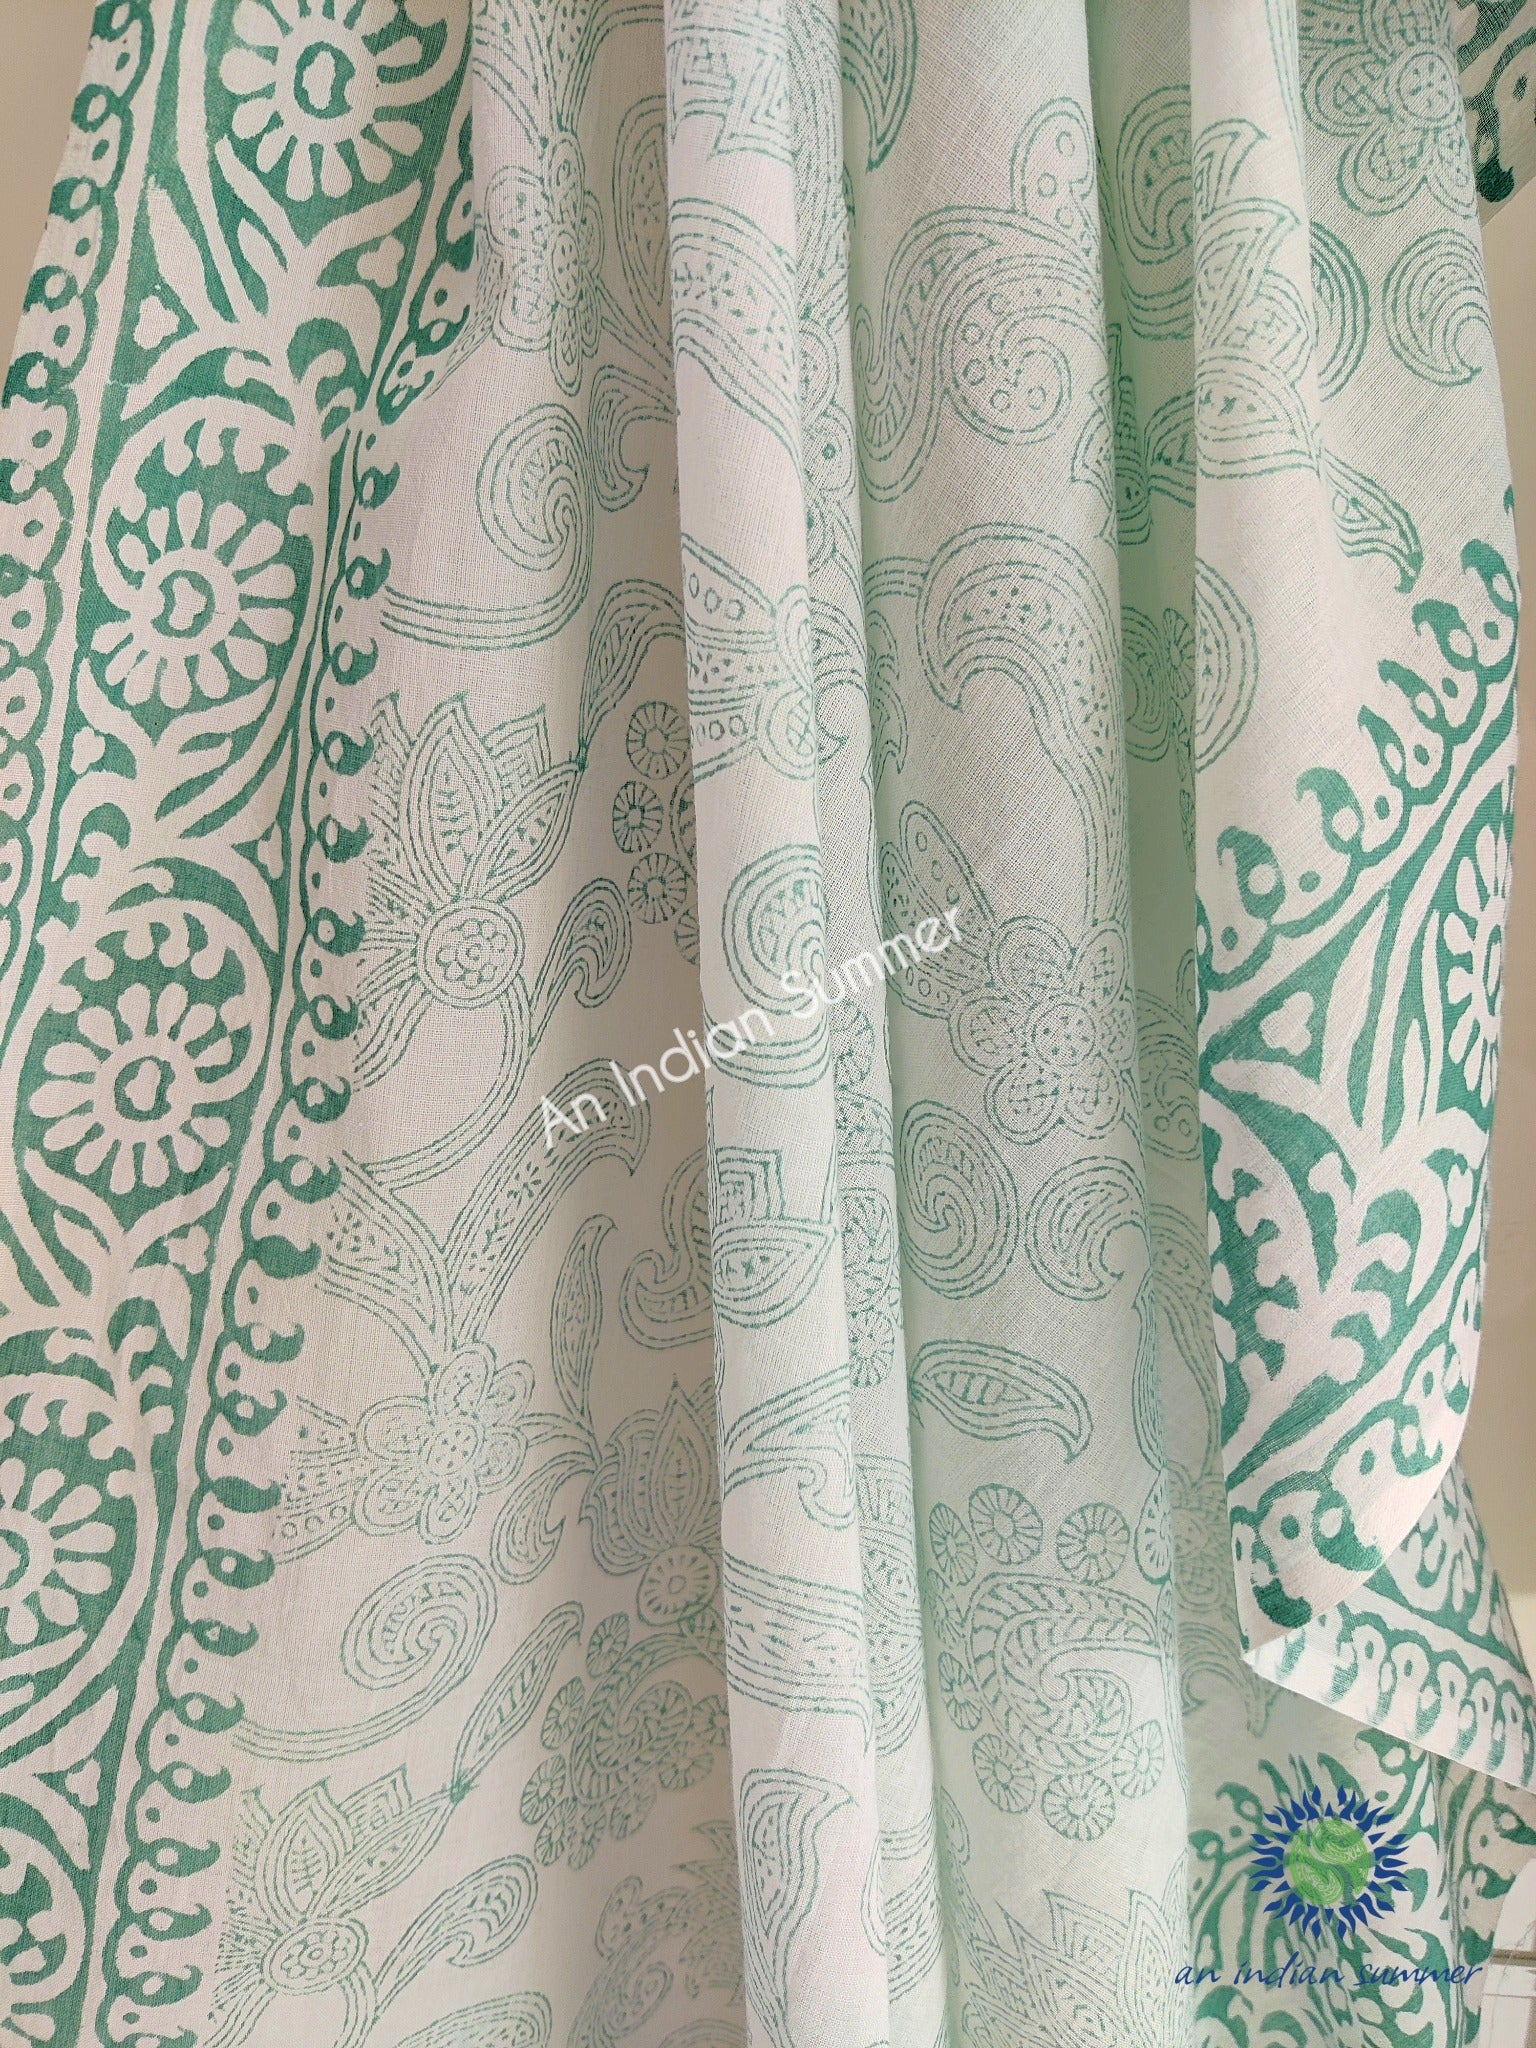 Paisley Sarong Pareo | Green | Hand Block Printed | Hand Block Printed | Cotton Voile | An Indian Summer | Seasonless Timeless Sustainable Ethical Authentic Artisan Conscious Clothing Lifestyle Brand